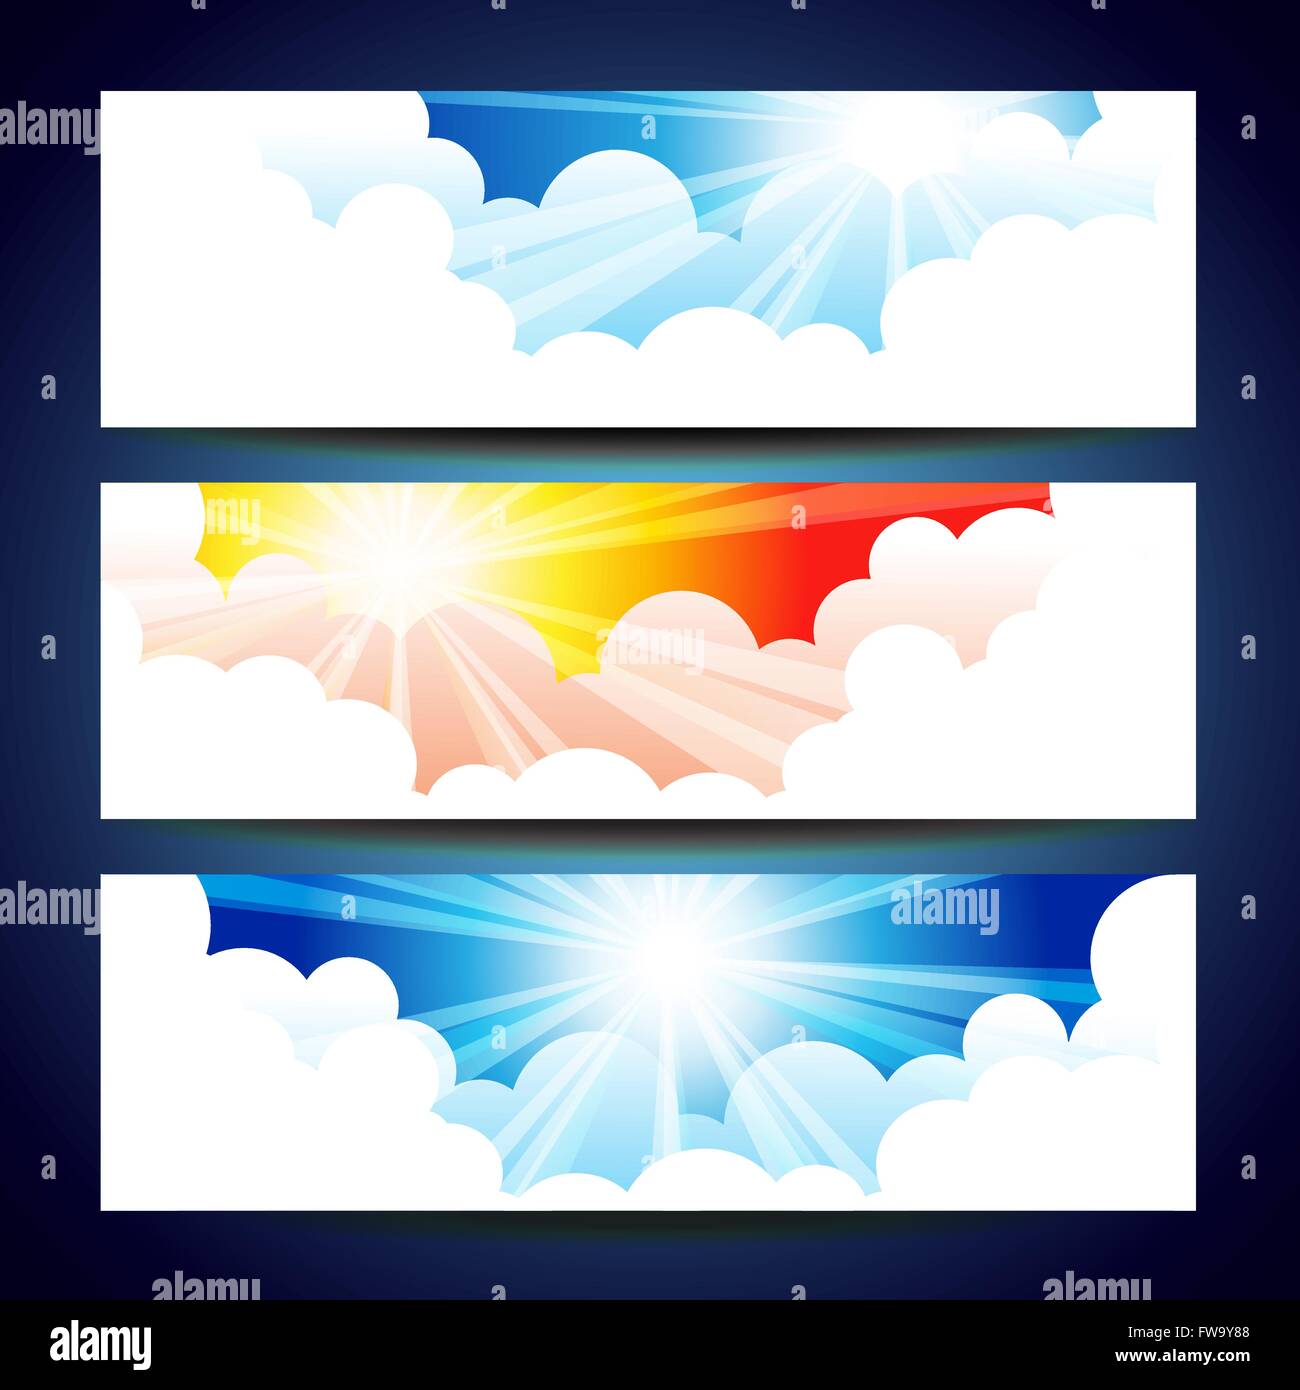 Banners sunset sky and cloud background. Stock Vector